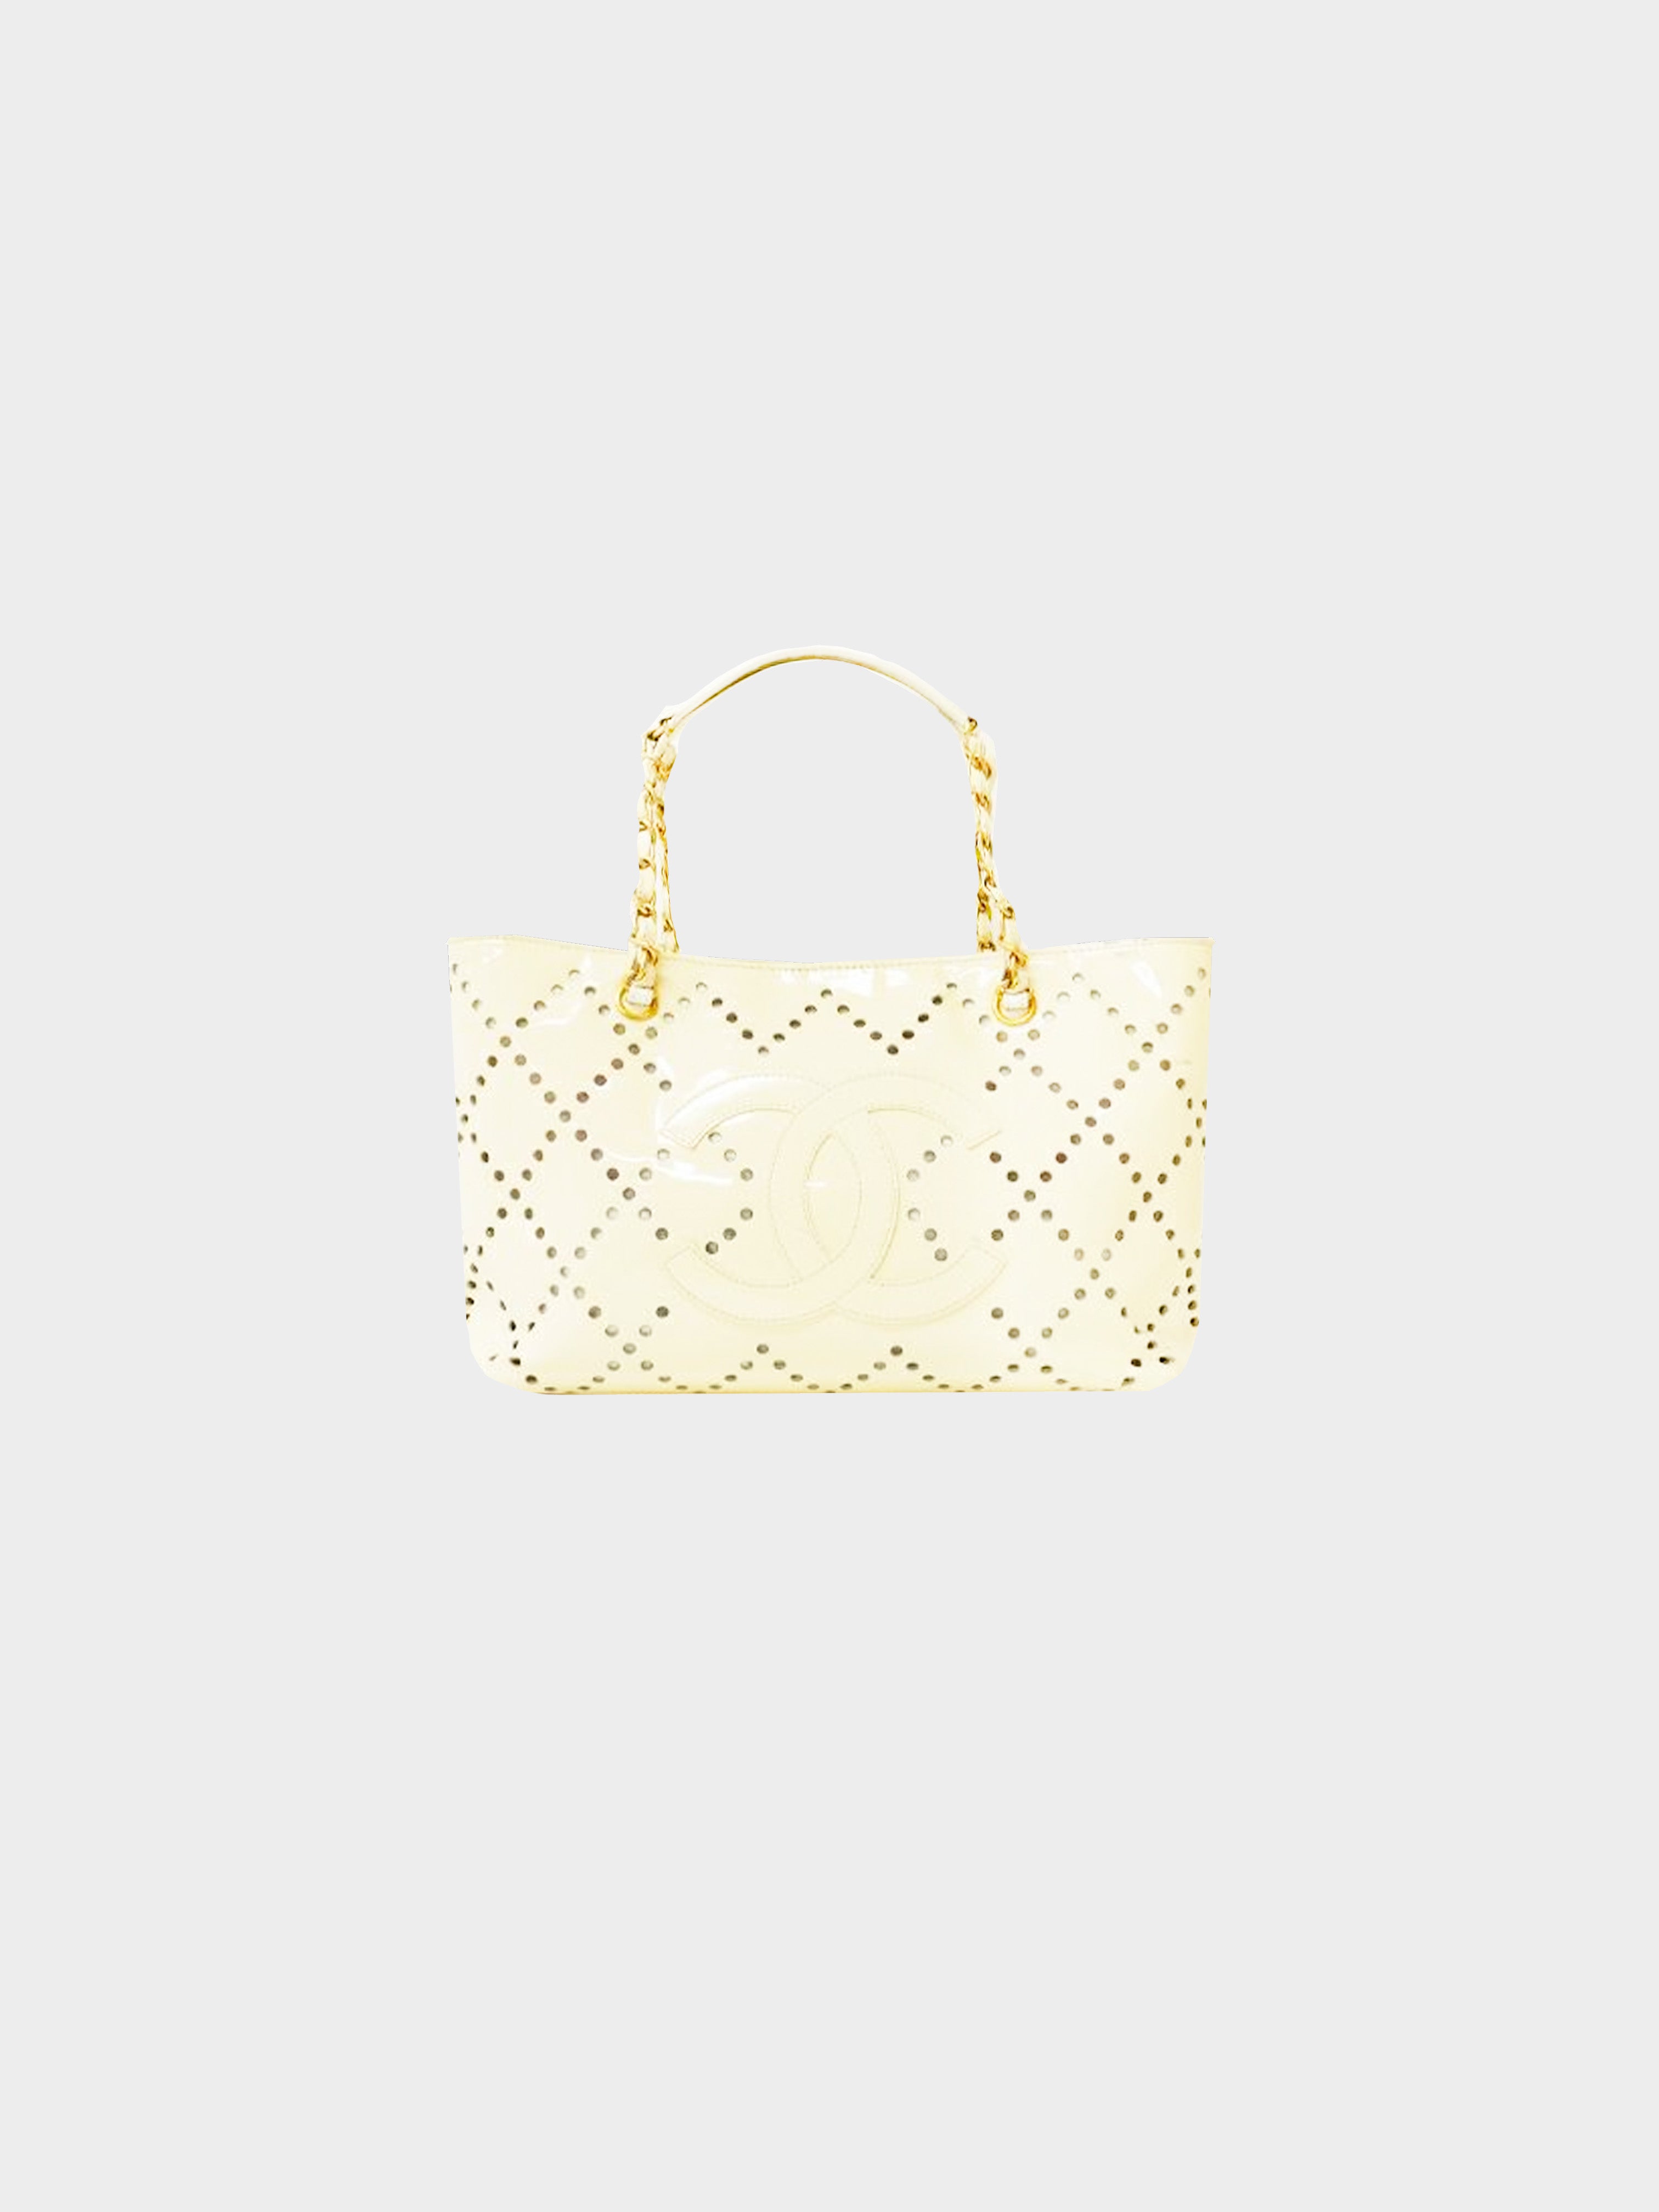 Chanel 2003 Perforated Patent Leather Bag · INTO